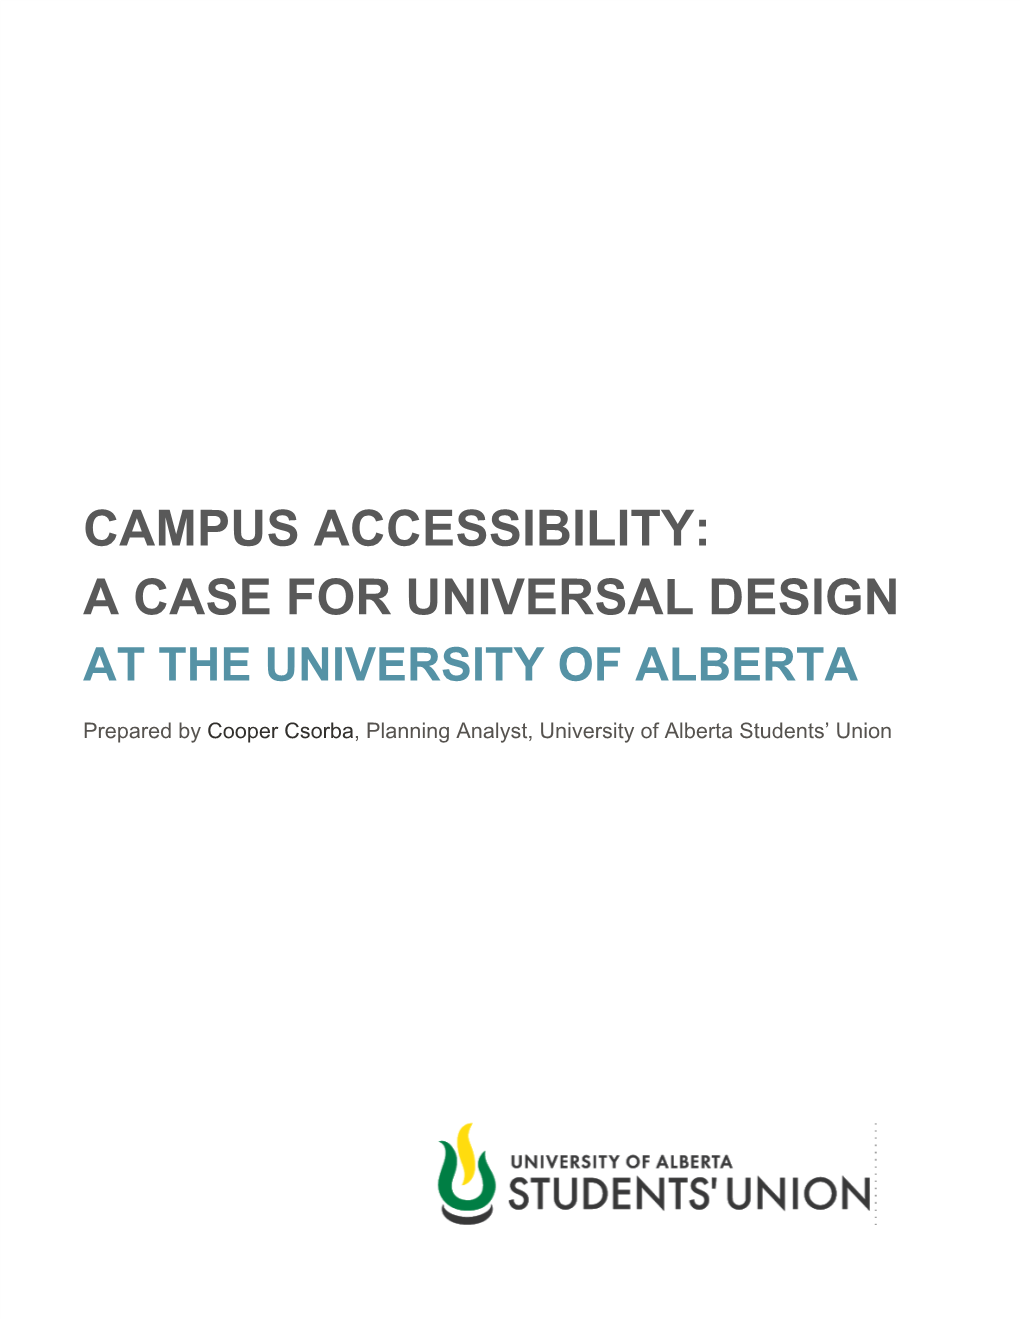 Campus Accessibility: a Case for Universal Design at the University of Alberta